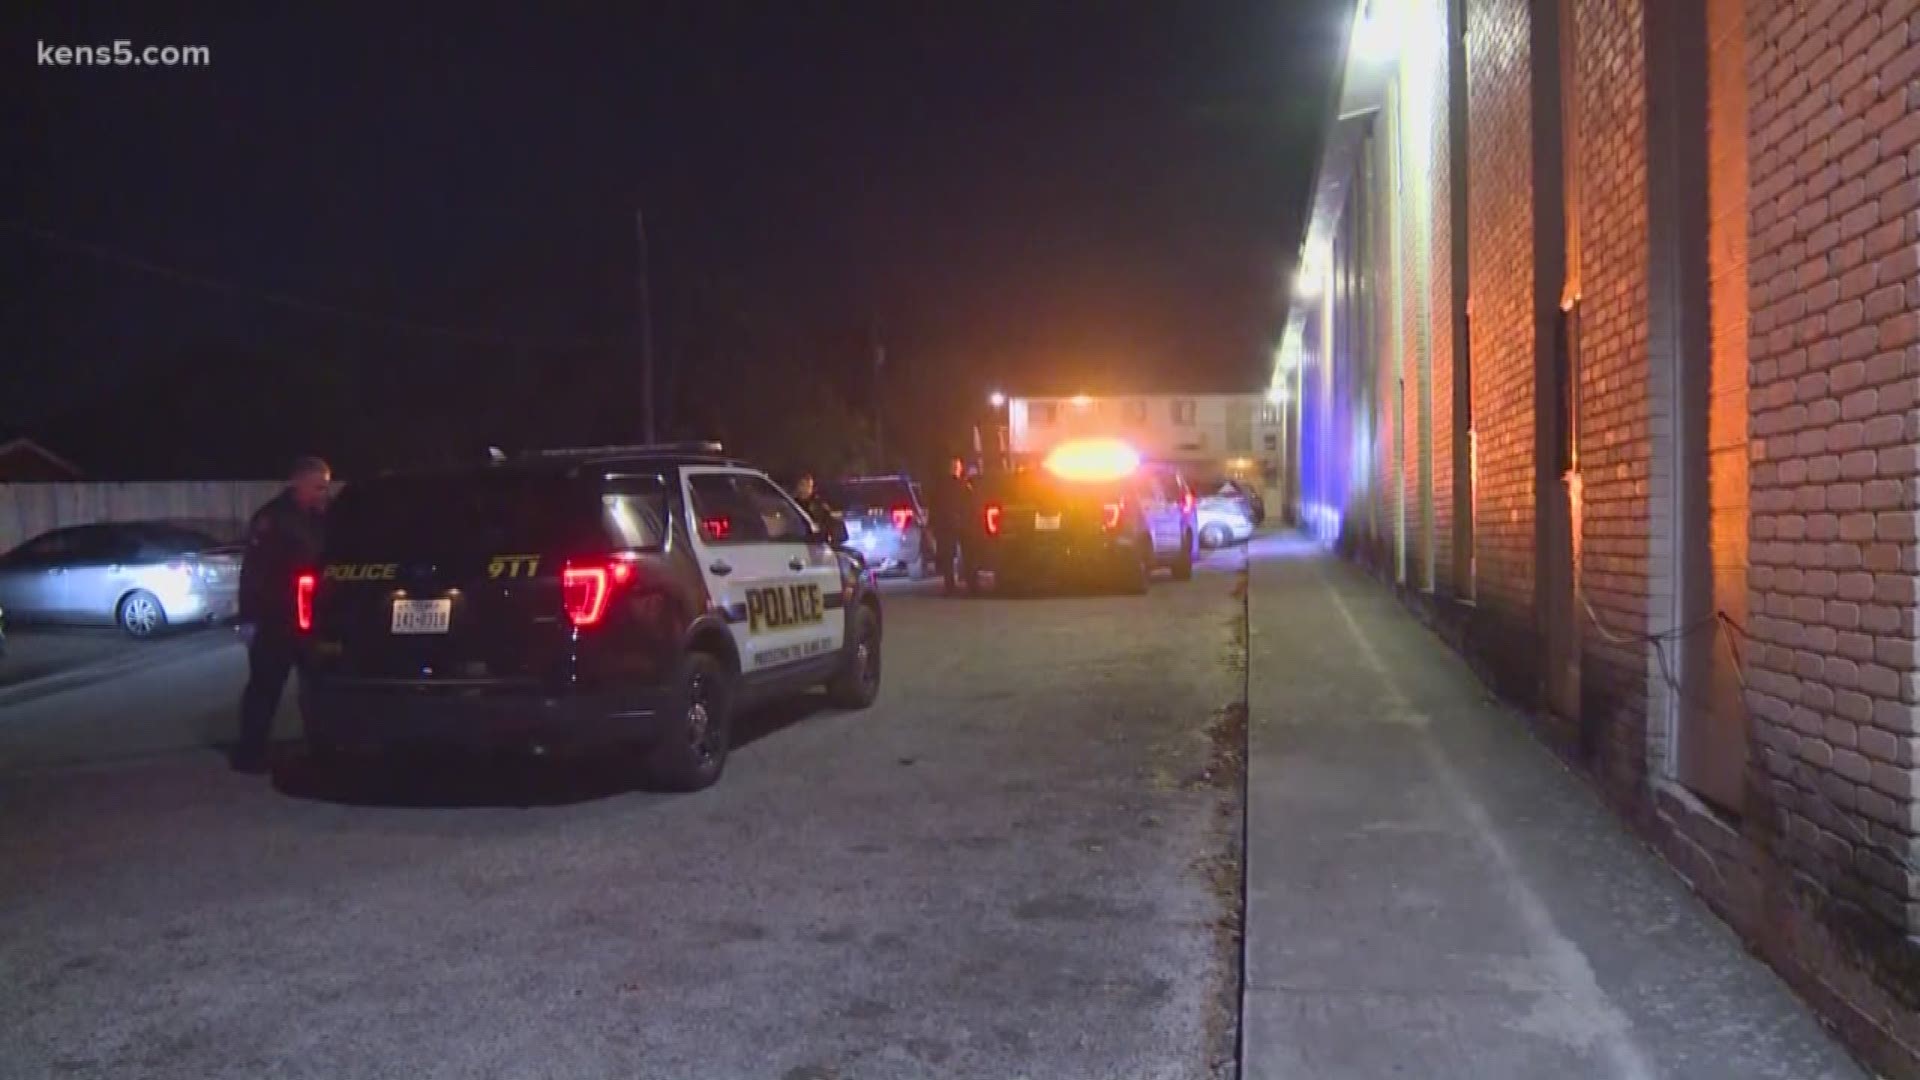 An all-out manhunt in northwest San Antonio after multiple suspects shot a man in an apartment complex parking lot. The victim is in serious condition.